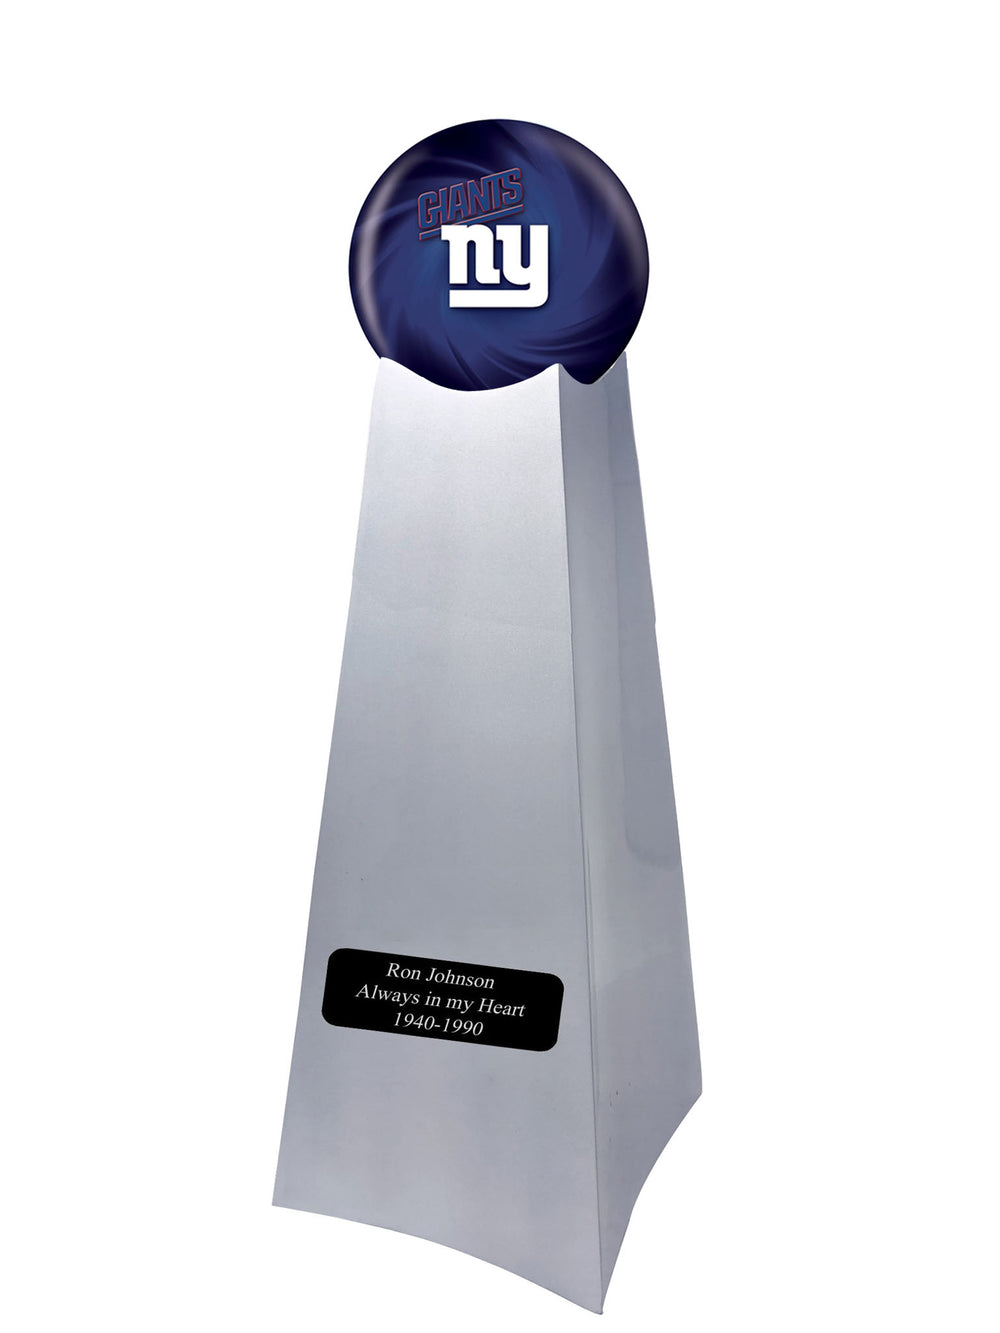 Championship Trophy Urn Base with Optional New York Giants Team Sphere